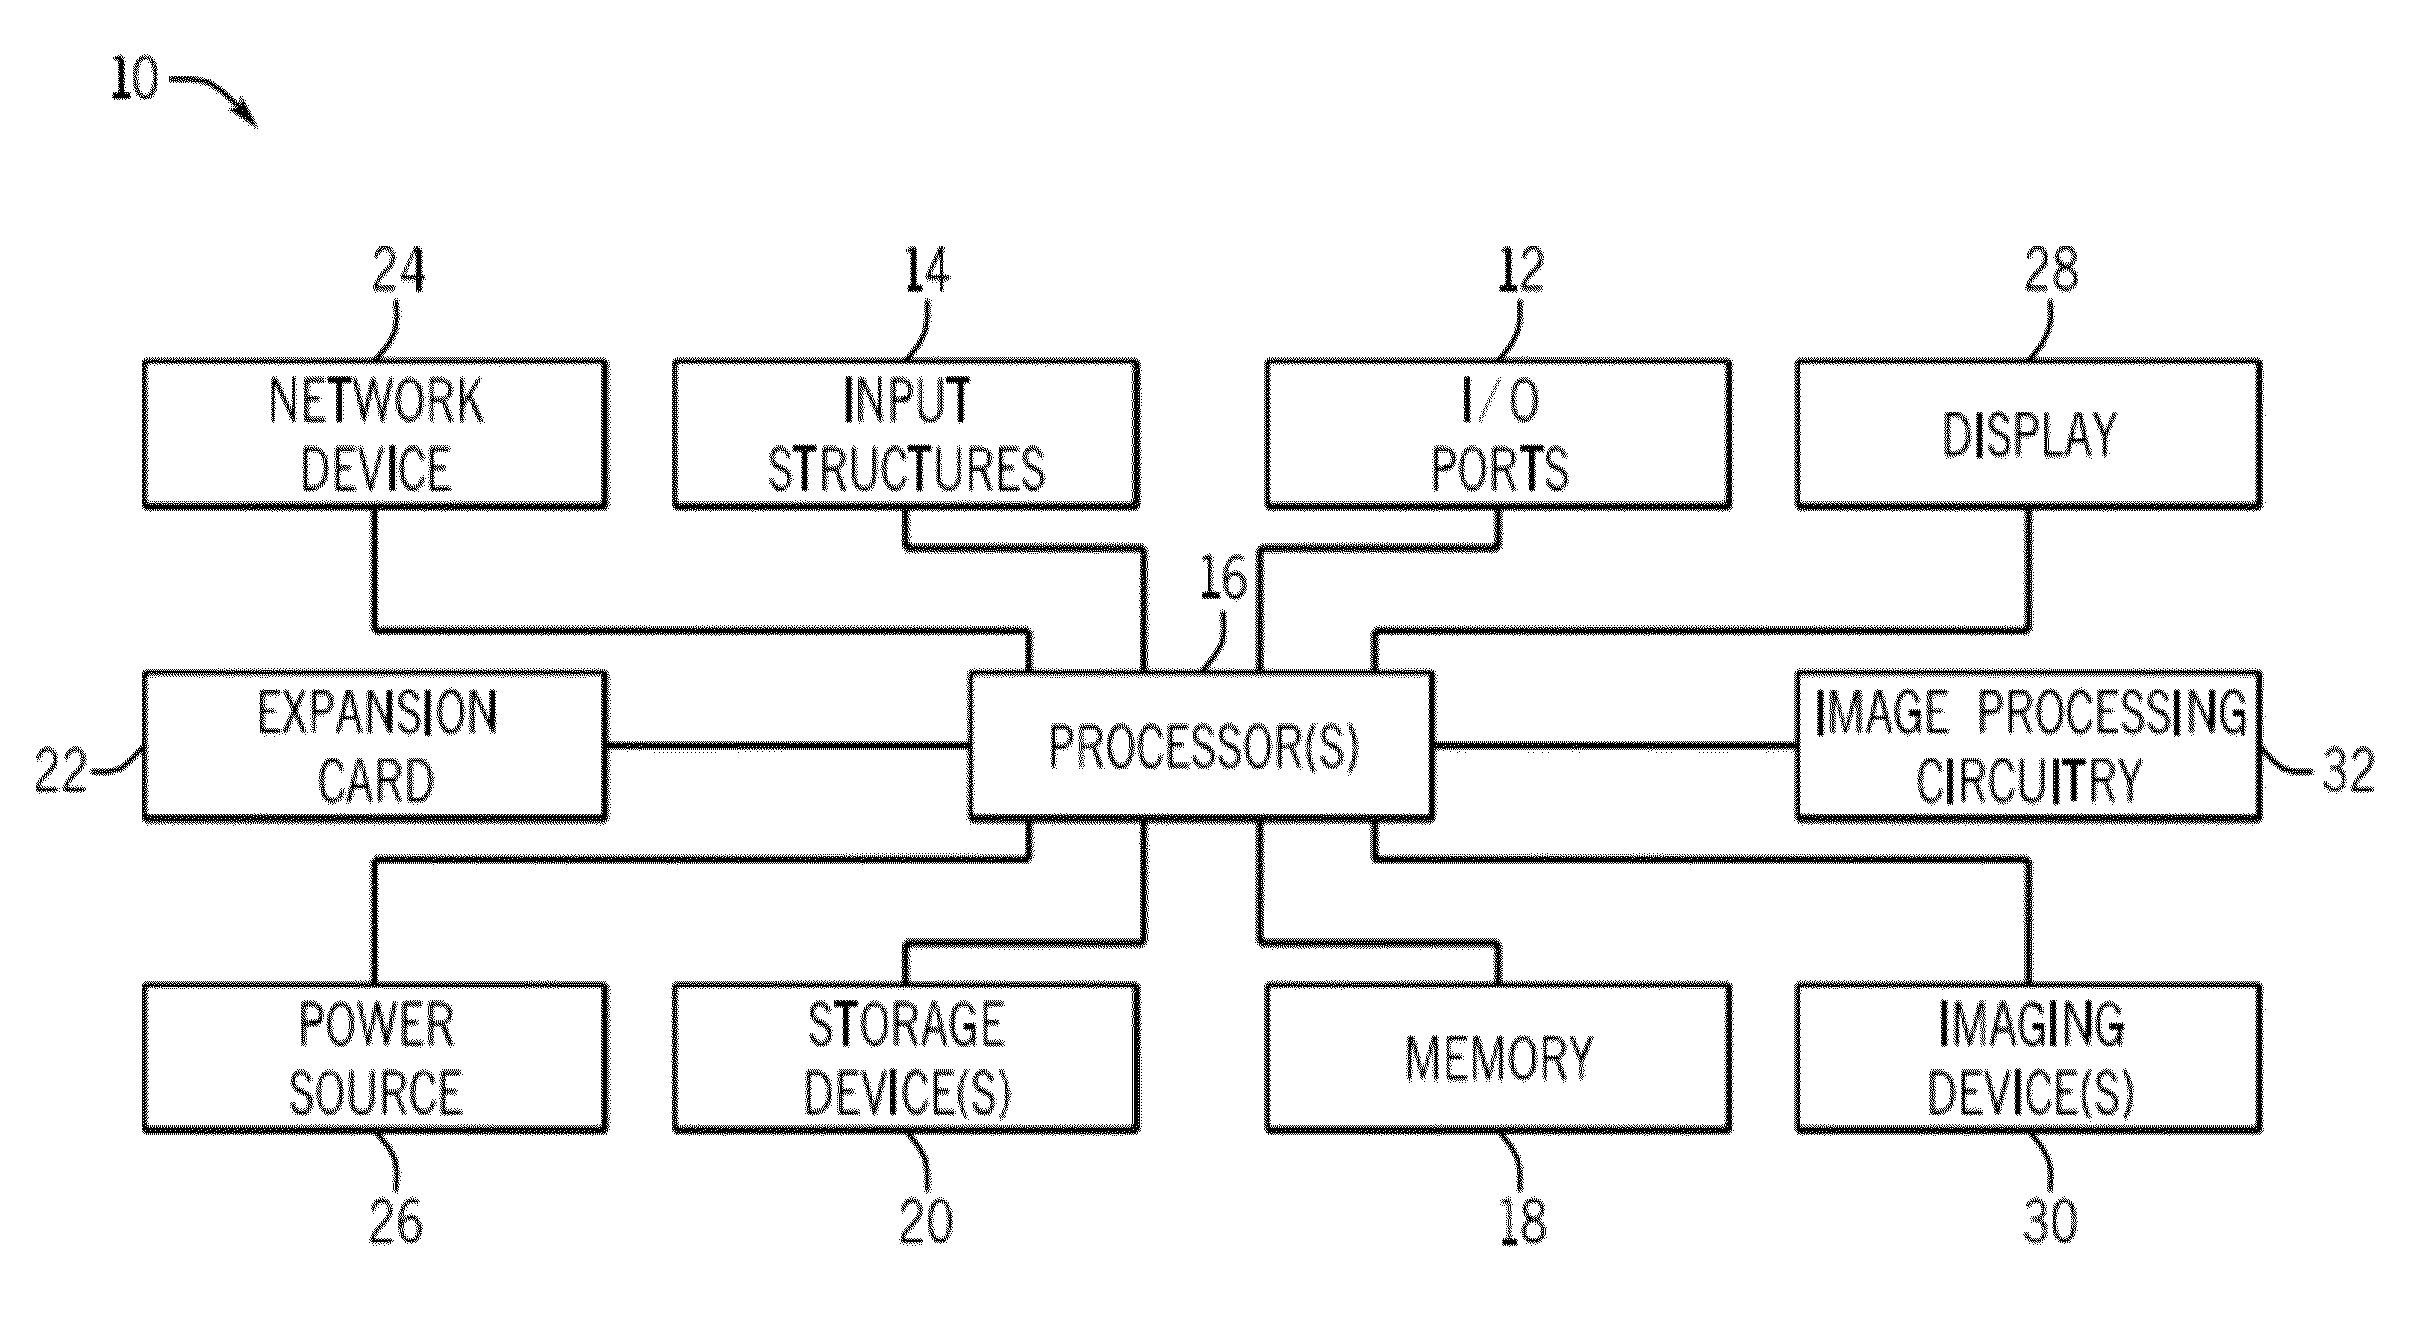 Techniques for synchronizing audio and video data in an image signal processing system